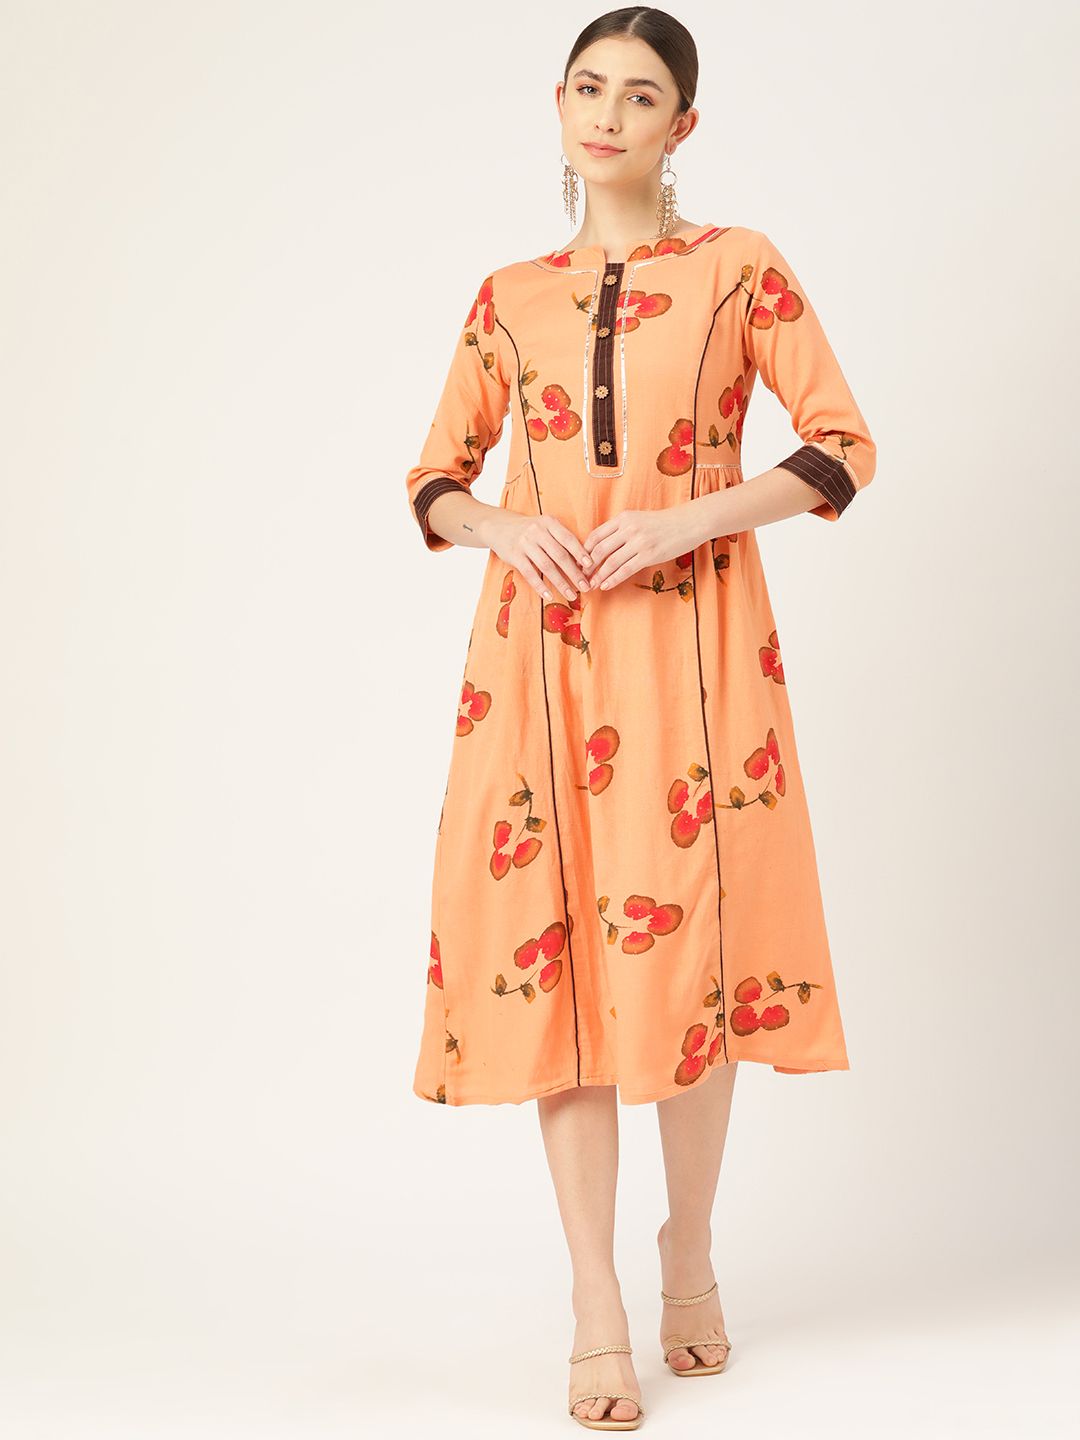 VAABA Peach-Coloured Floral Ethnic A-Line Midi Dress Price in India